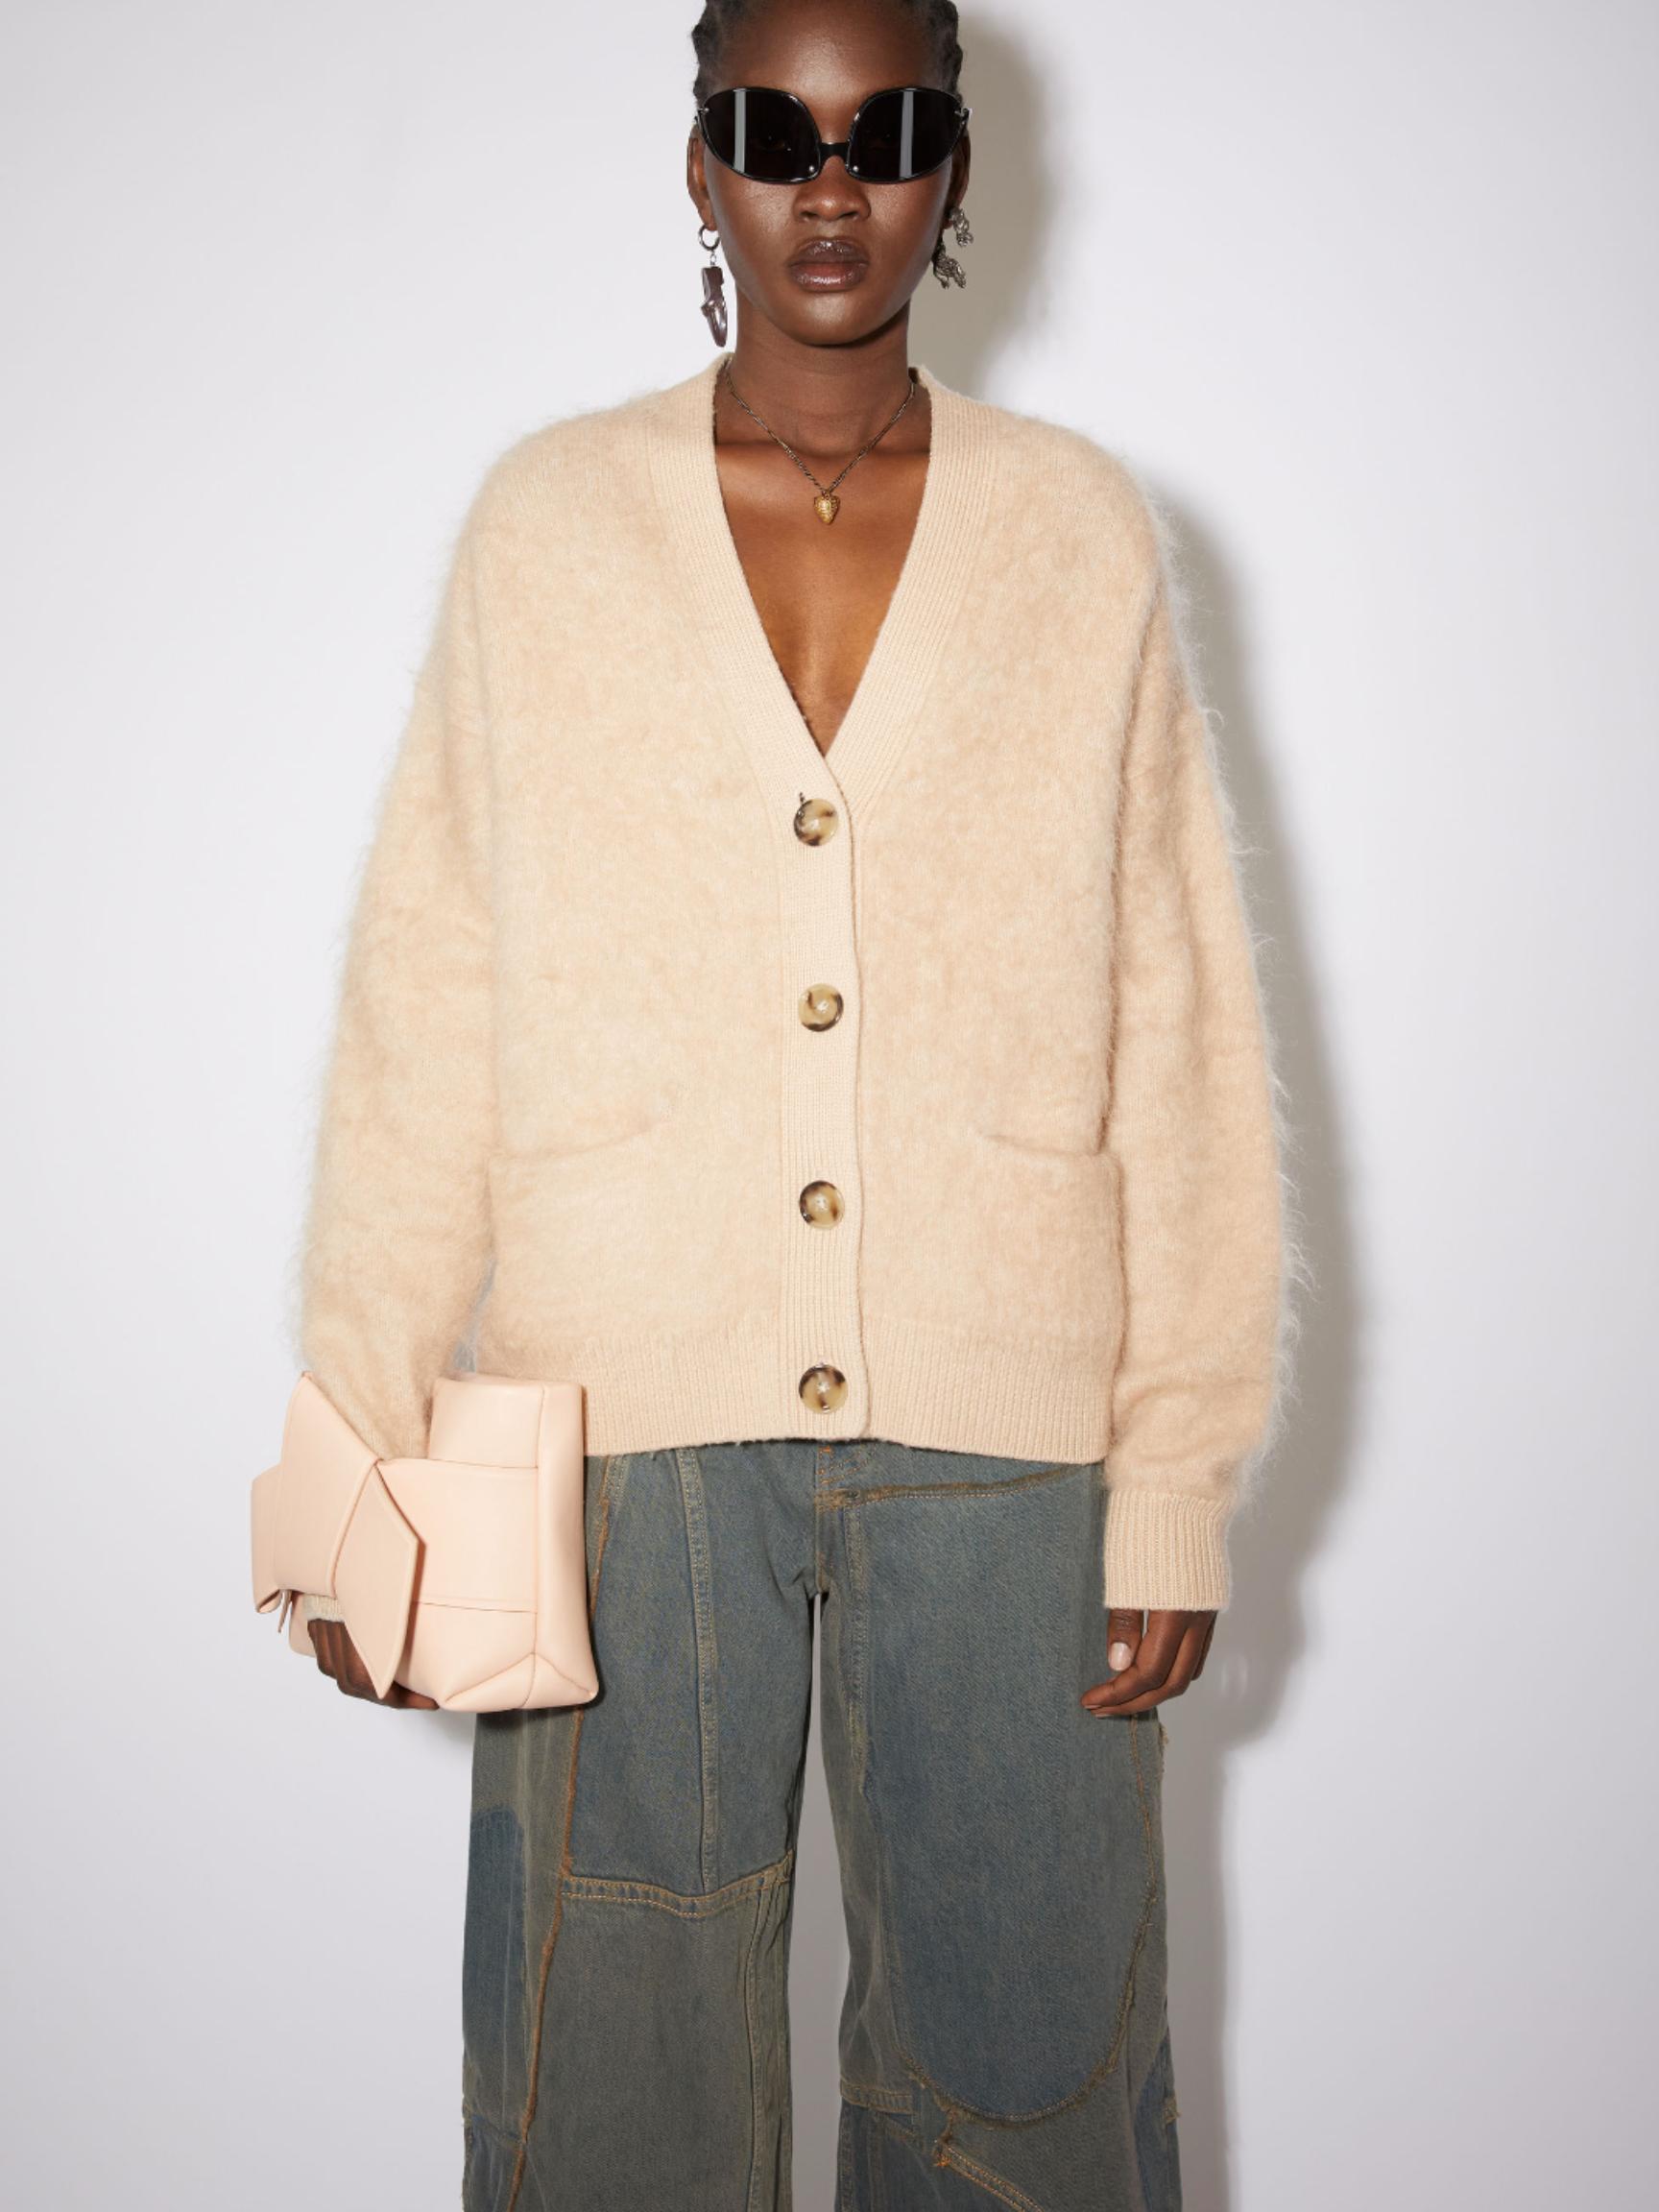 Acne Studios Mohair Wool Fluffy Cardigan in Natural | Lyst